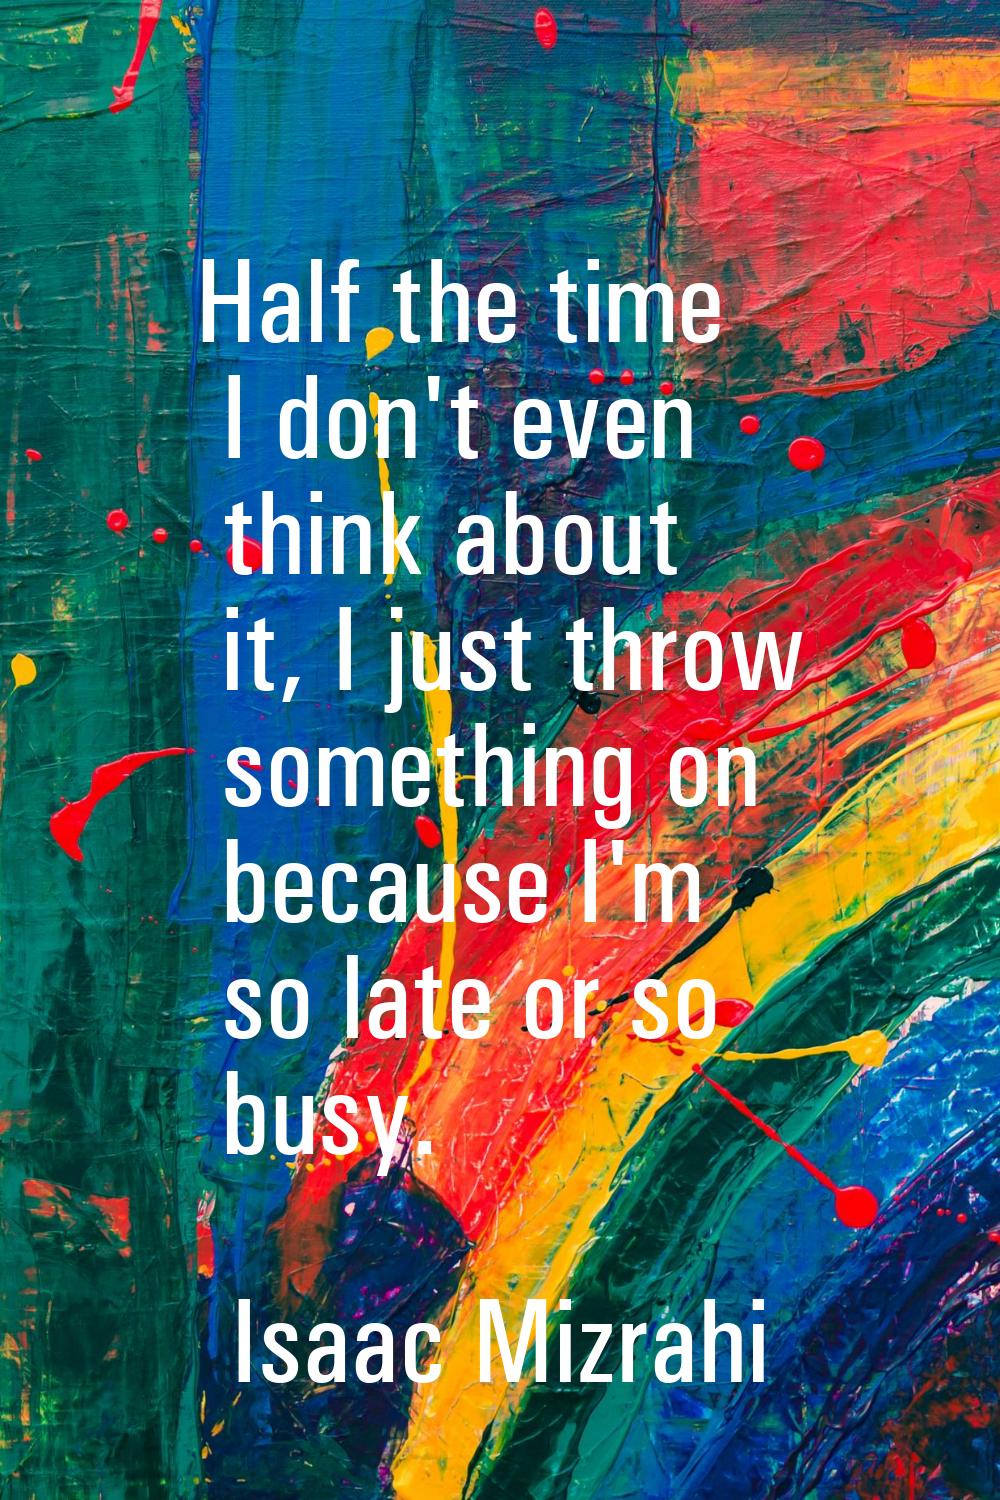 Half the time I don't even think about it, I just throw something on because I'm so late or so busy